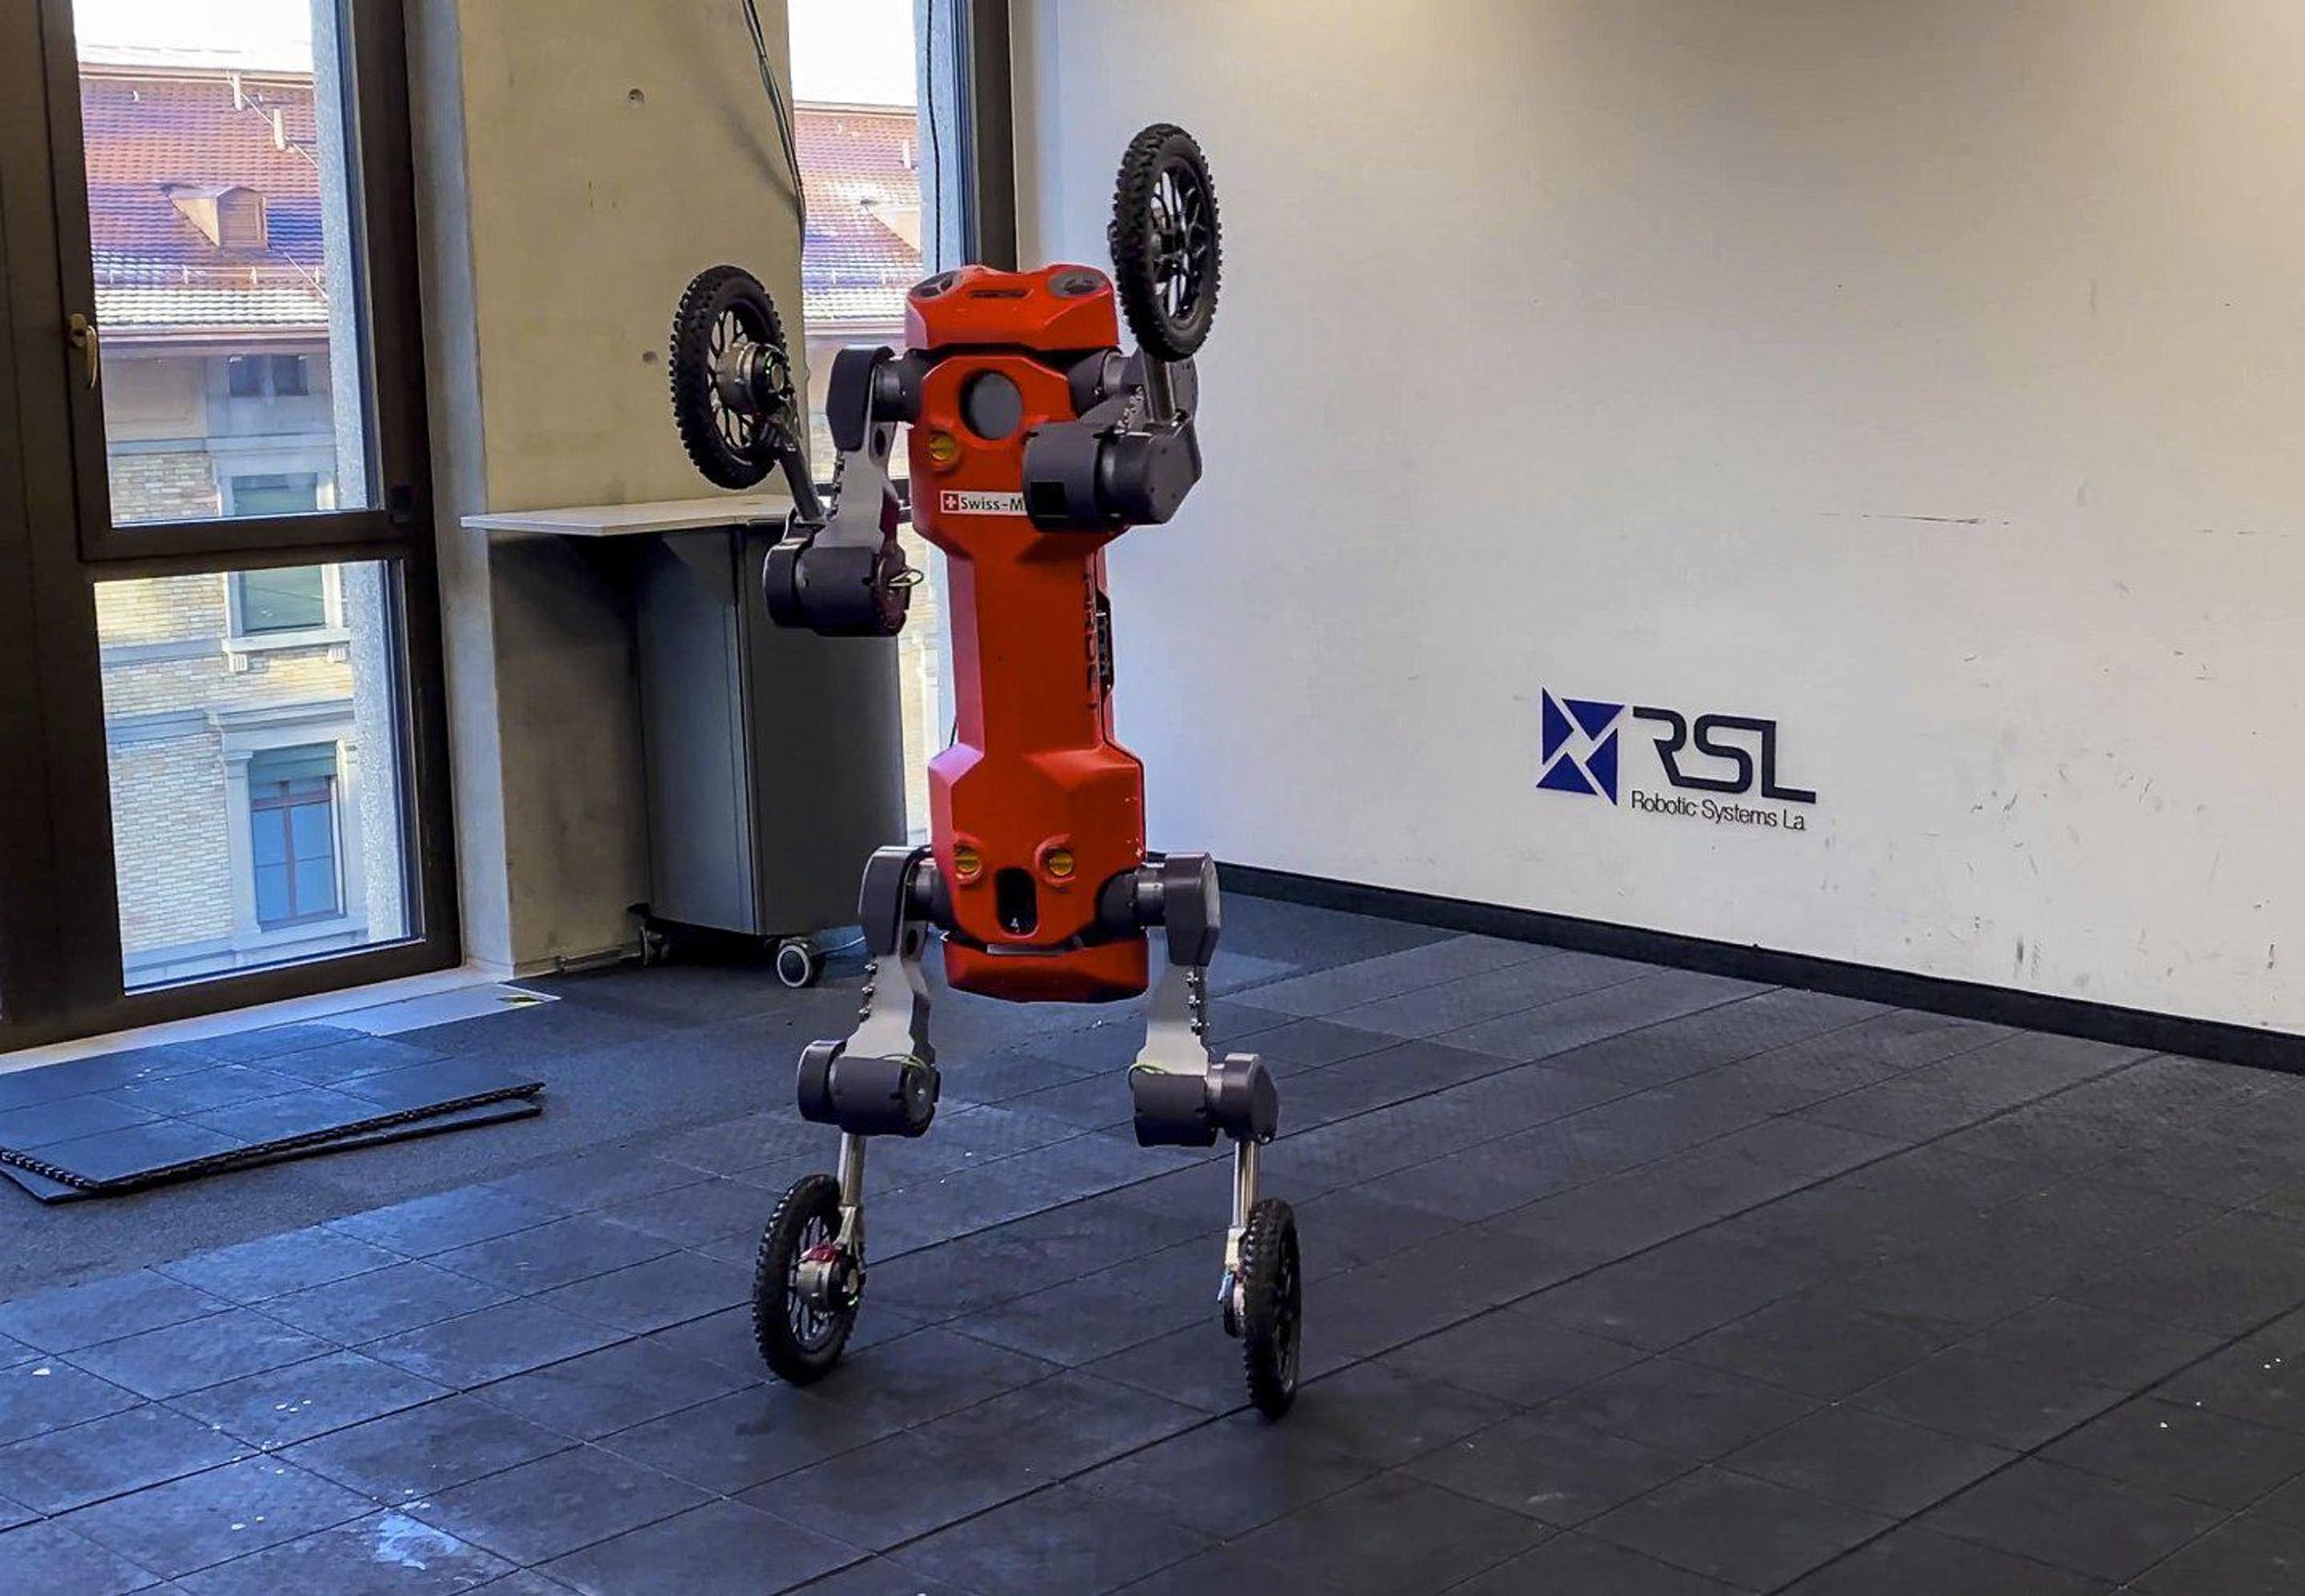 An orange quadruped robot with wheels at the end of its limbs stand upright on two wheels